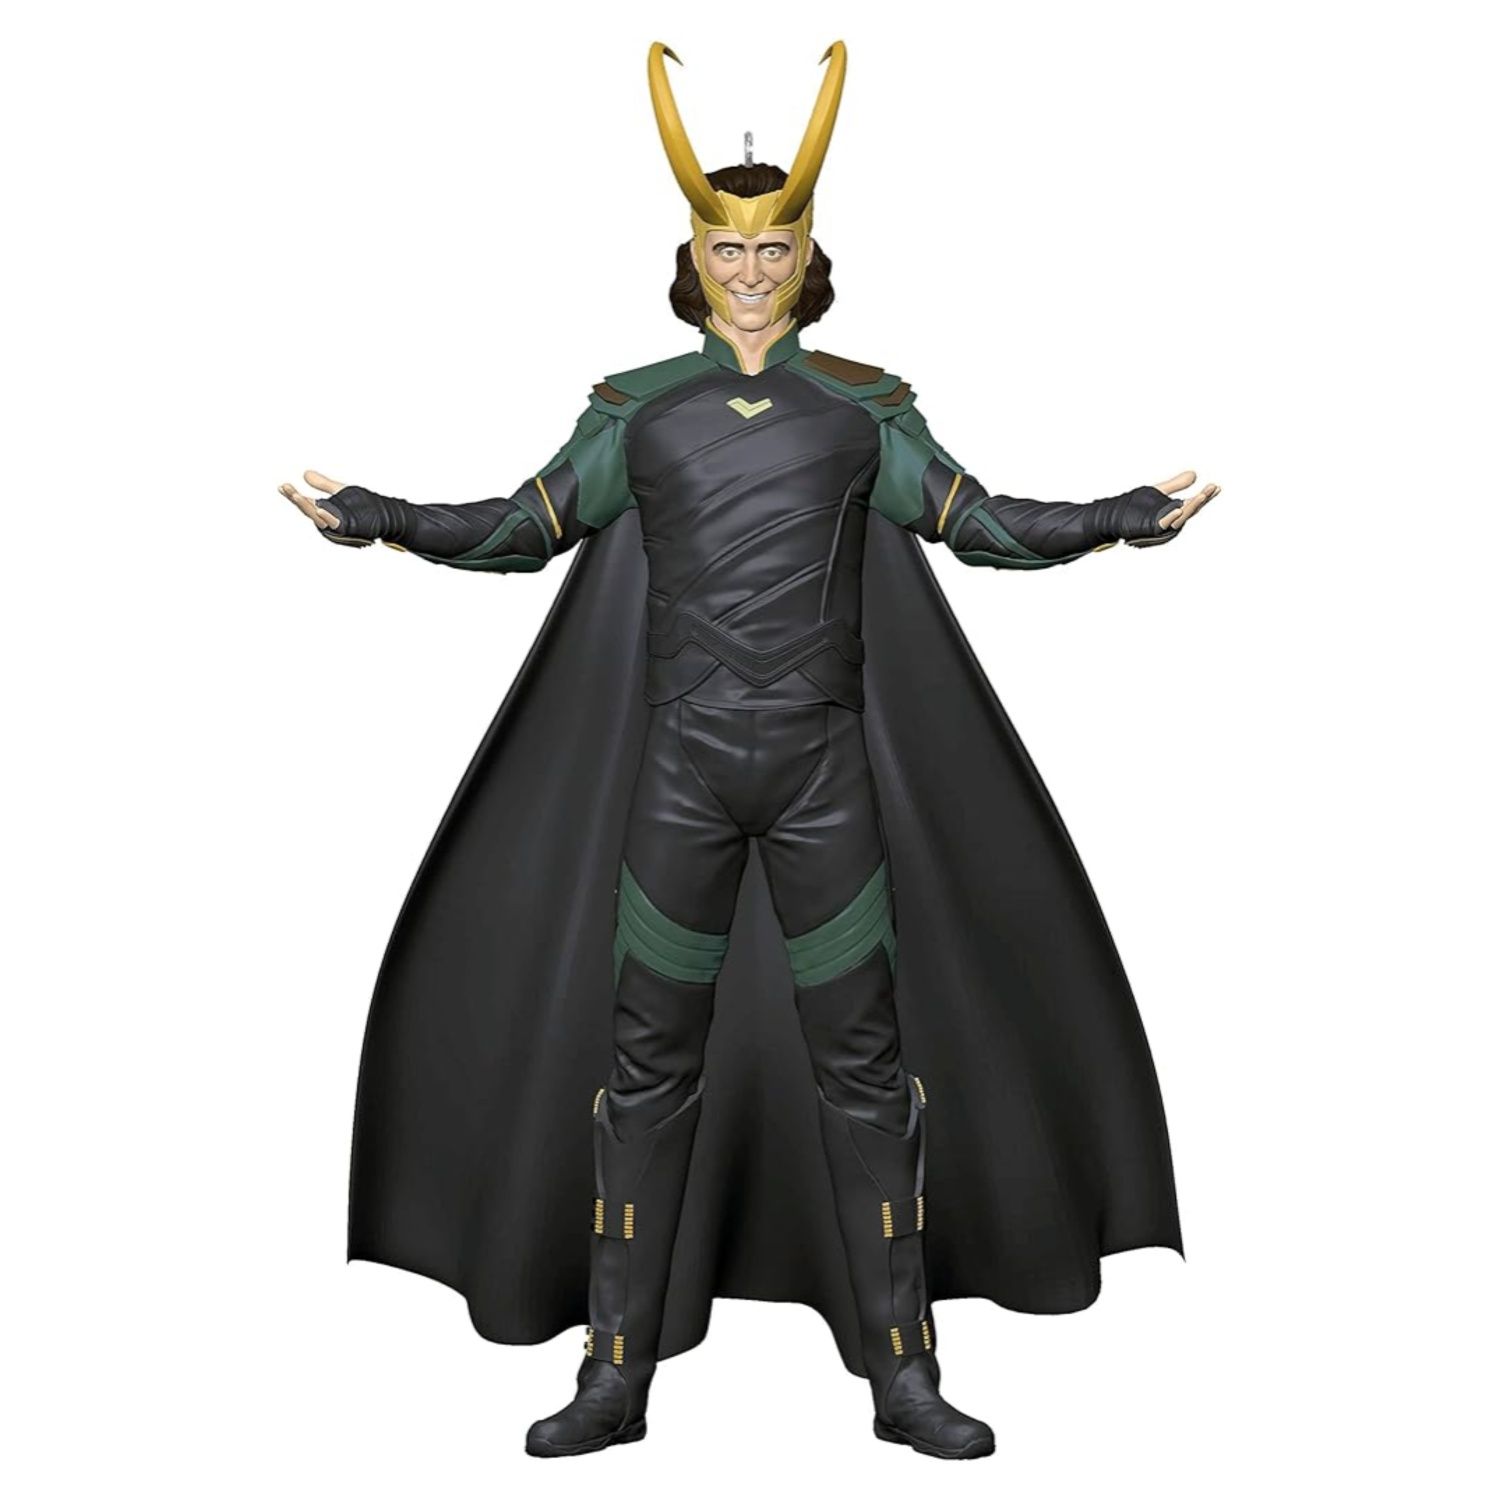 This image depicts a Loki ornament with his crown and outstretched arms